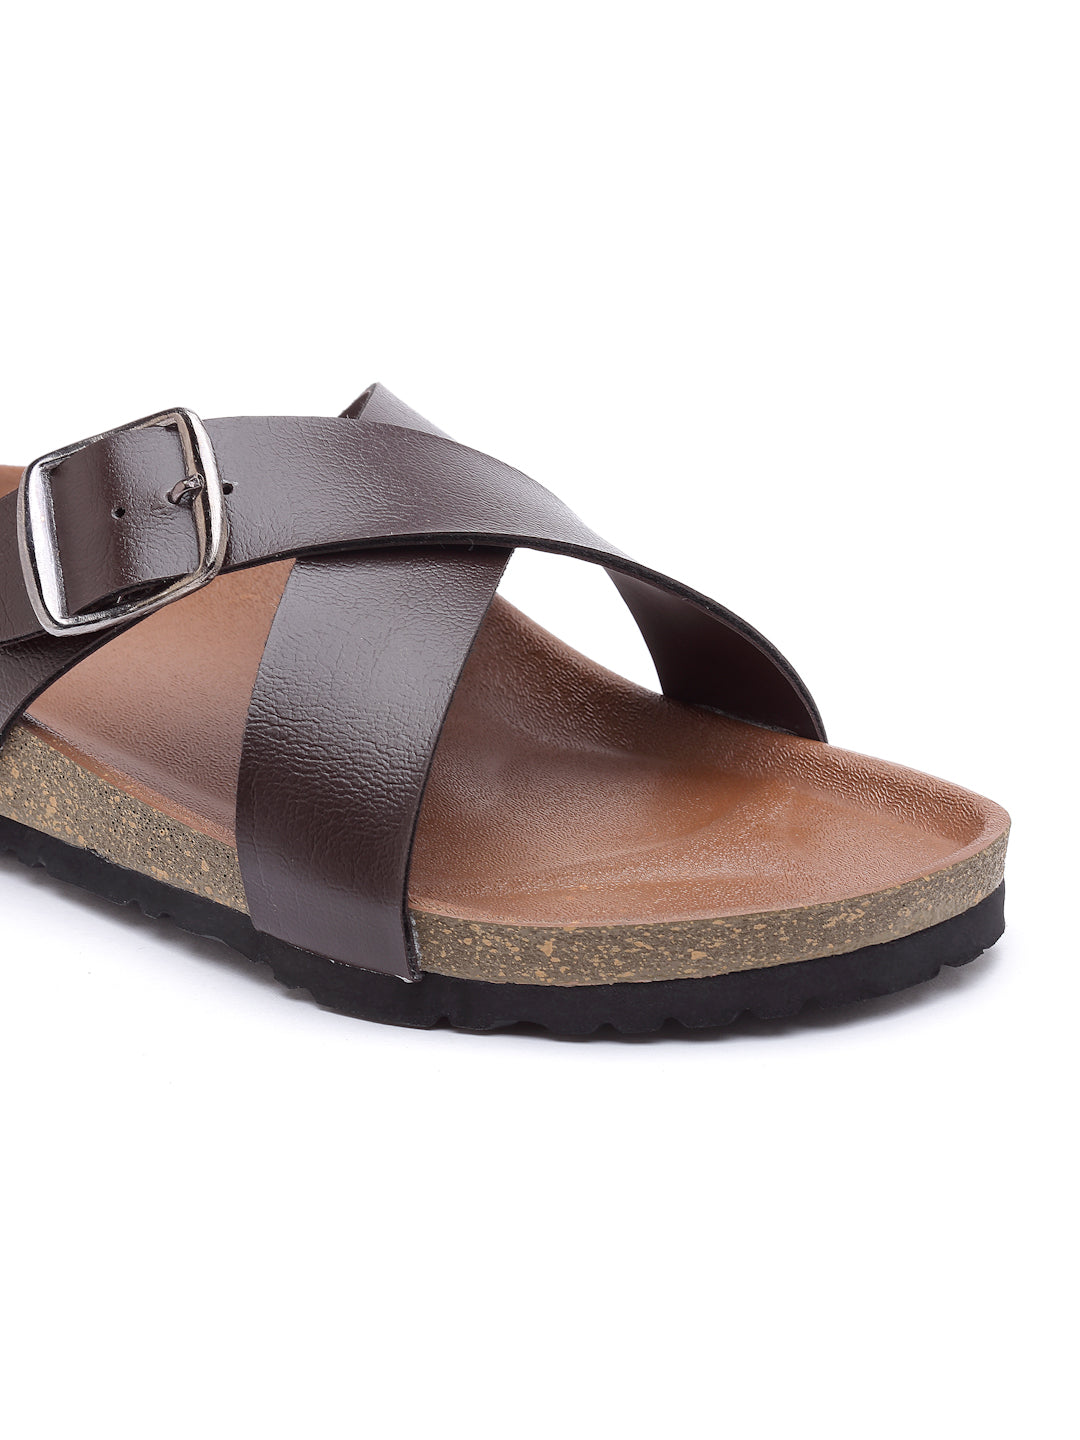 Women's Stylish Brown Synthetic Leather Casual Sandal